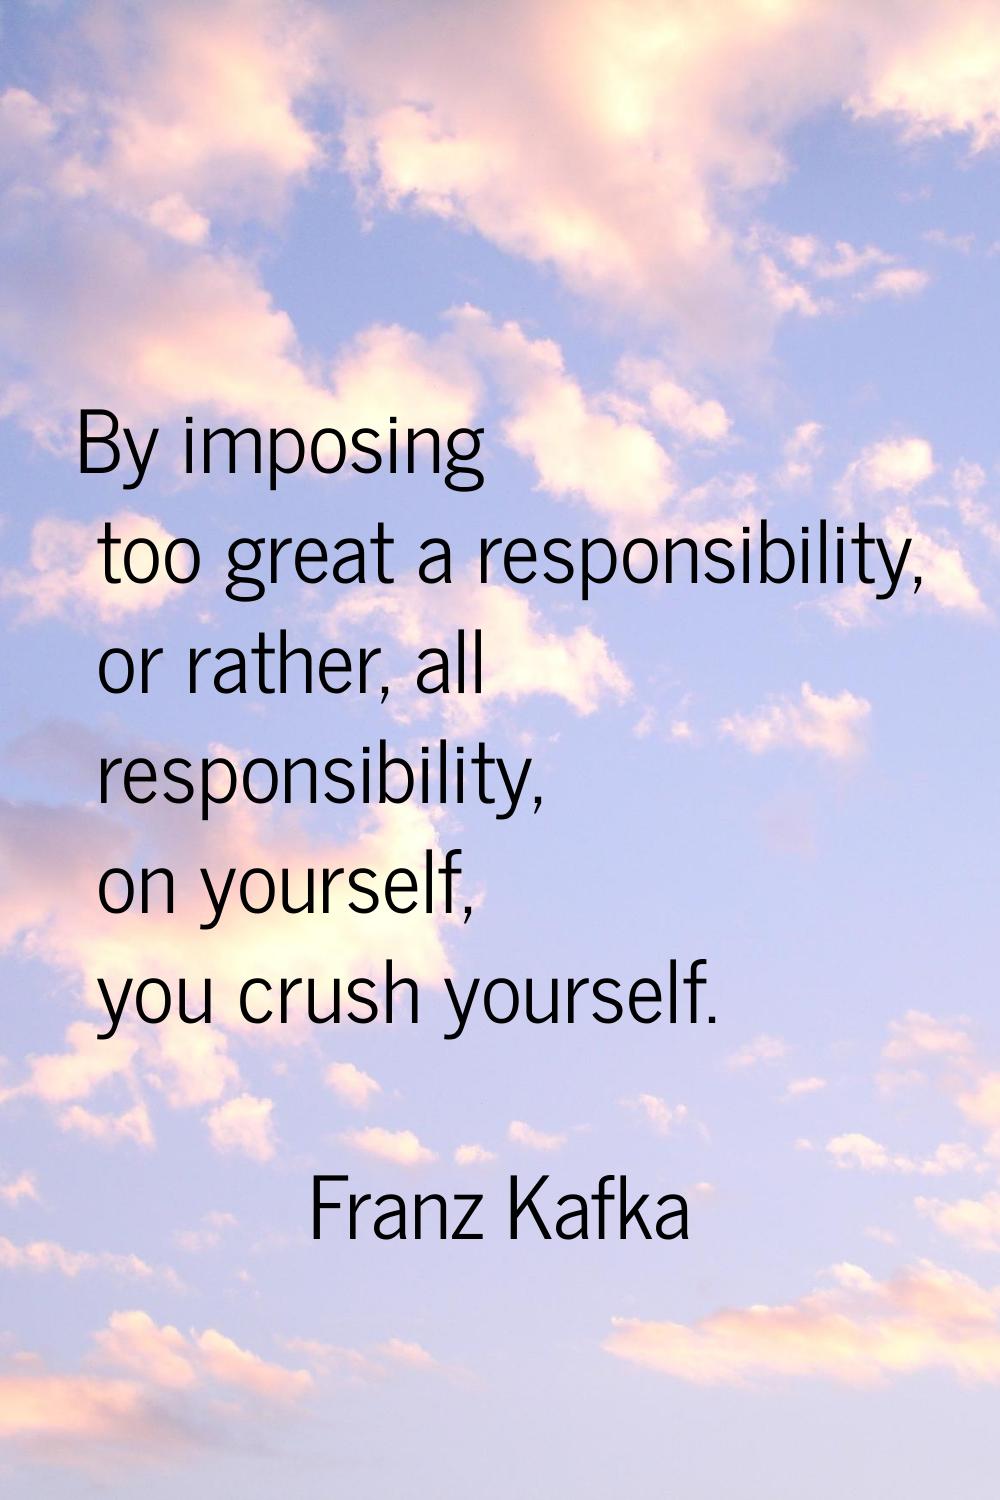 By imposing too great a responsibility, or rather, all responsibility, on yourself, you crush yours